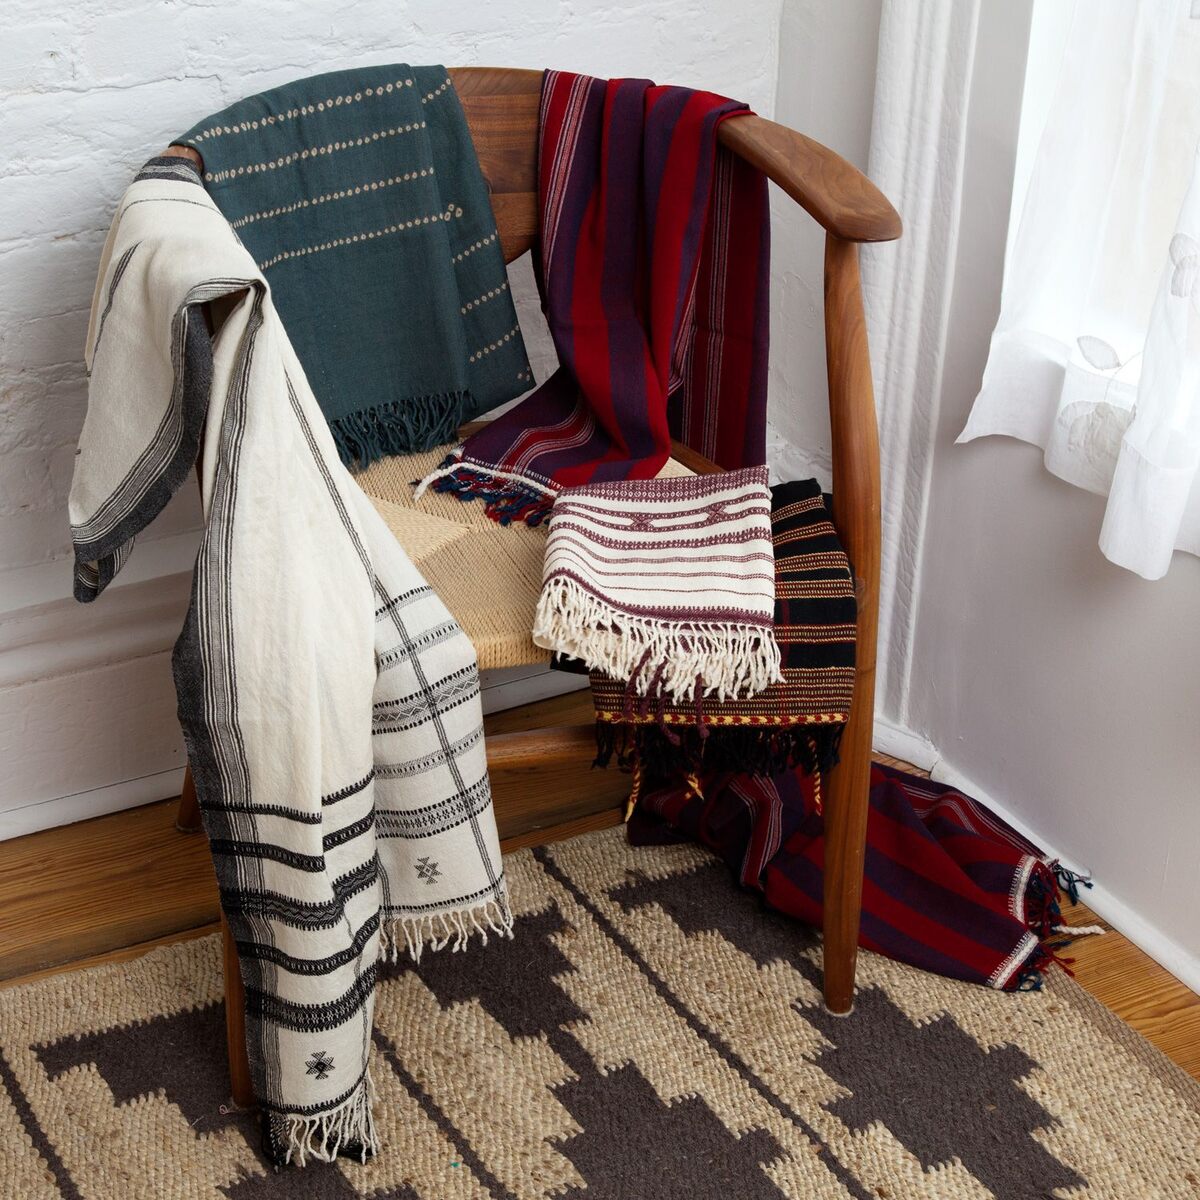 How To Use A Wool Scarf As Home Decor